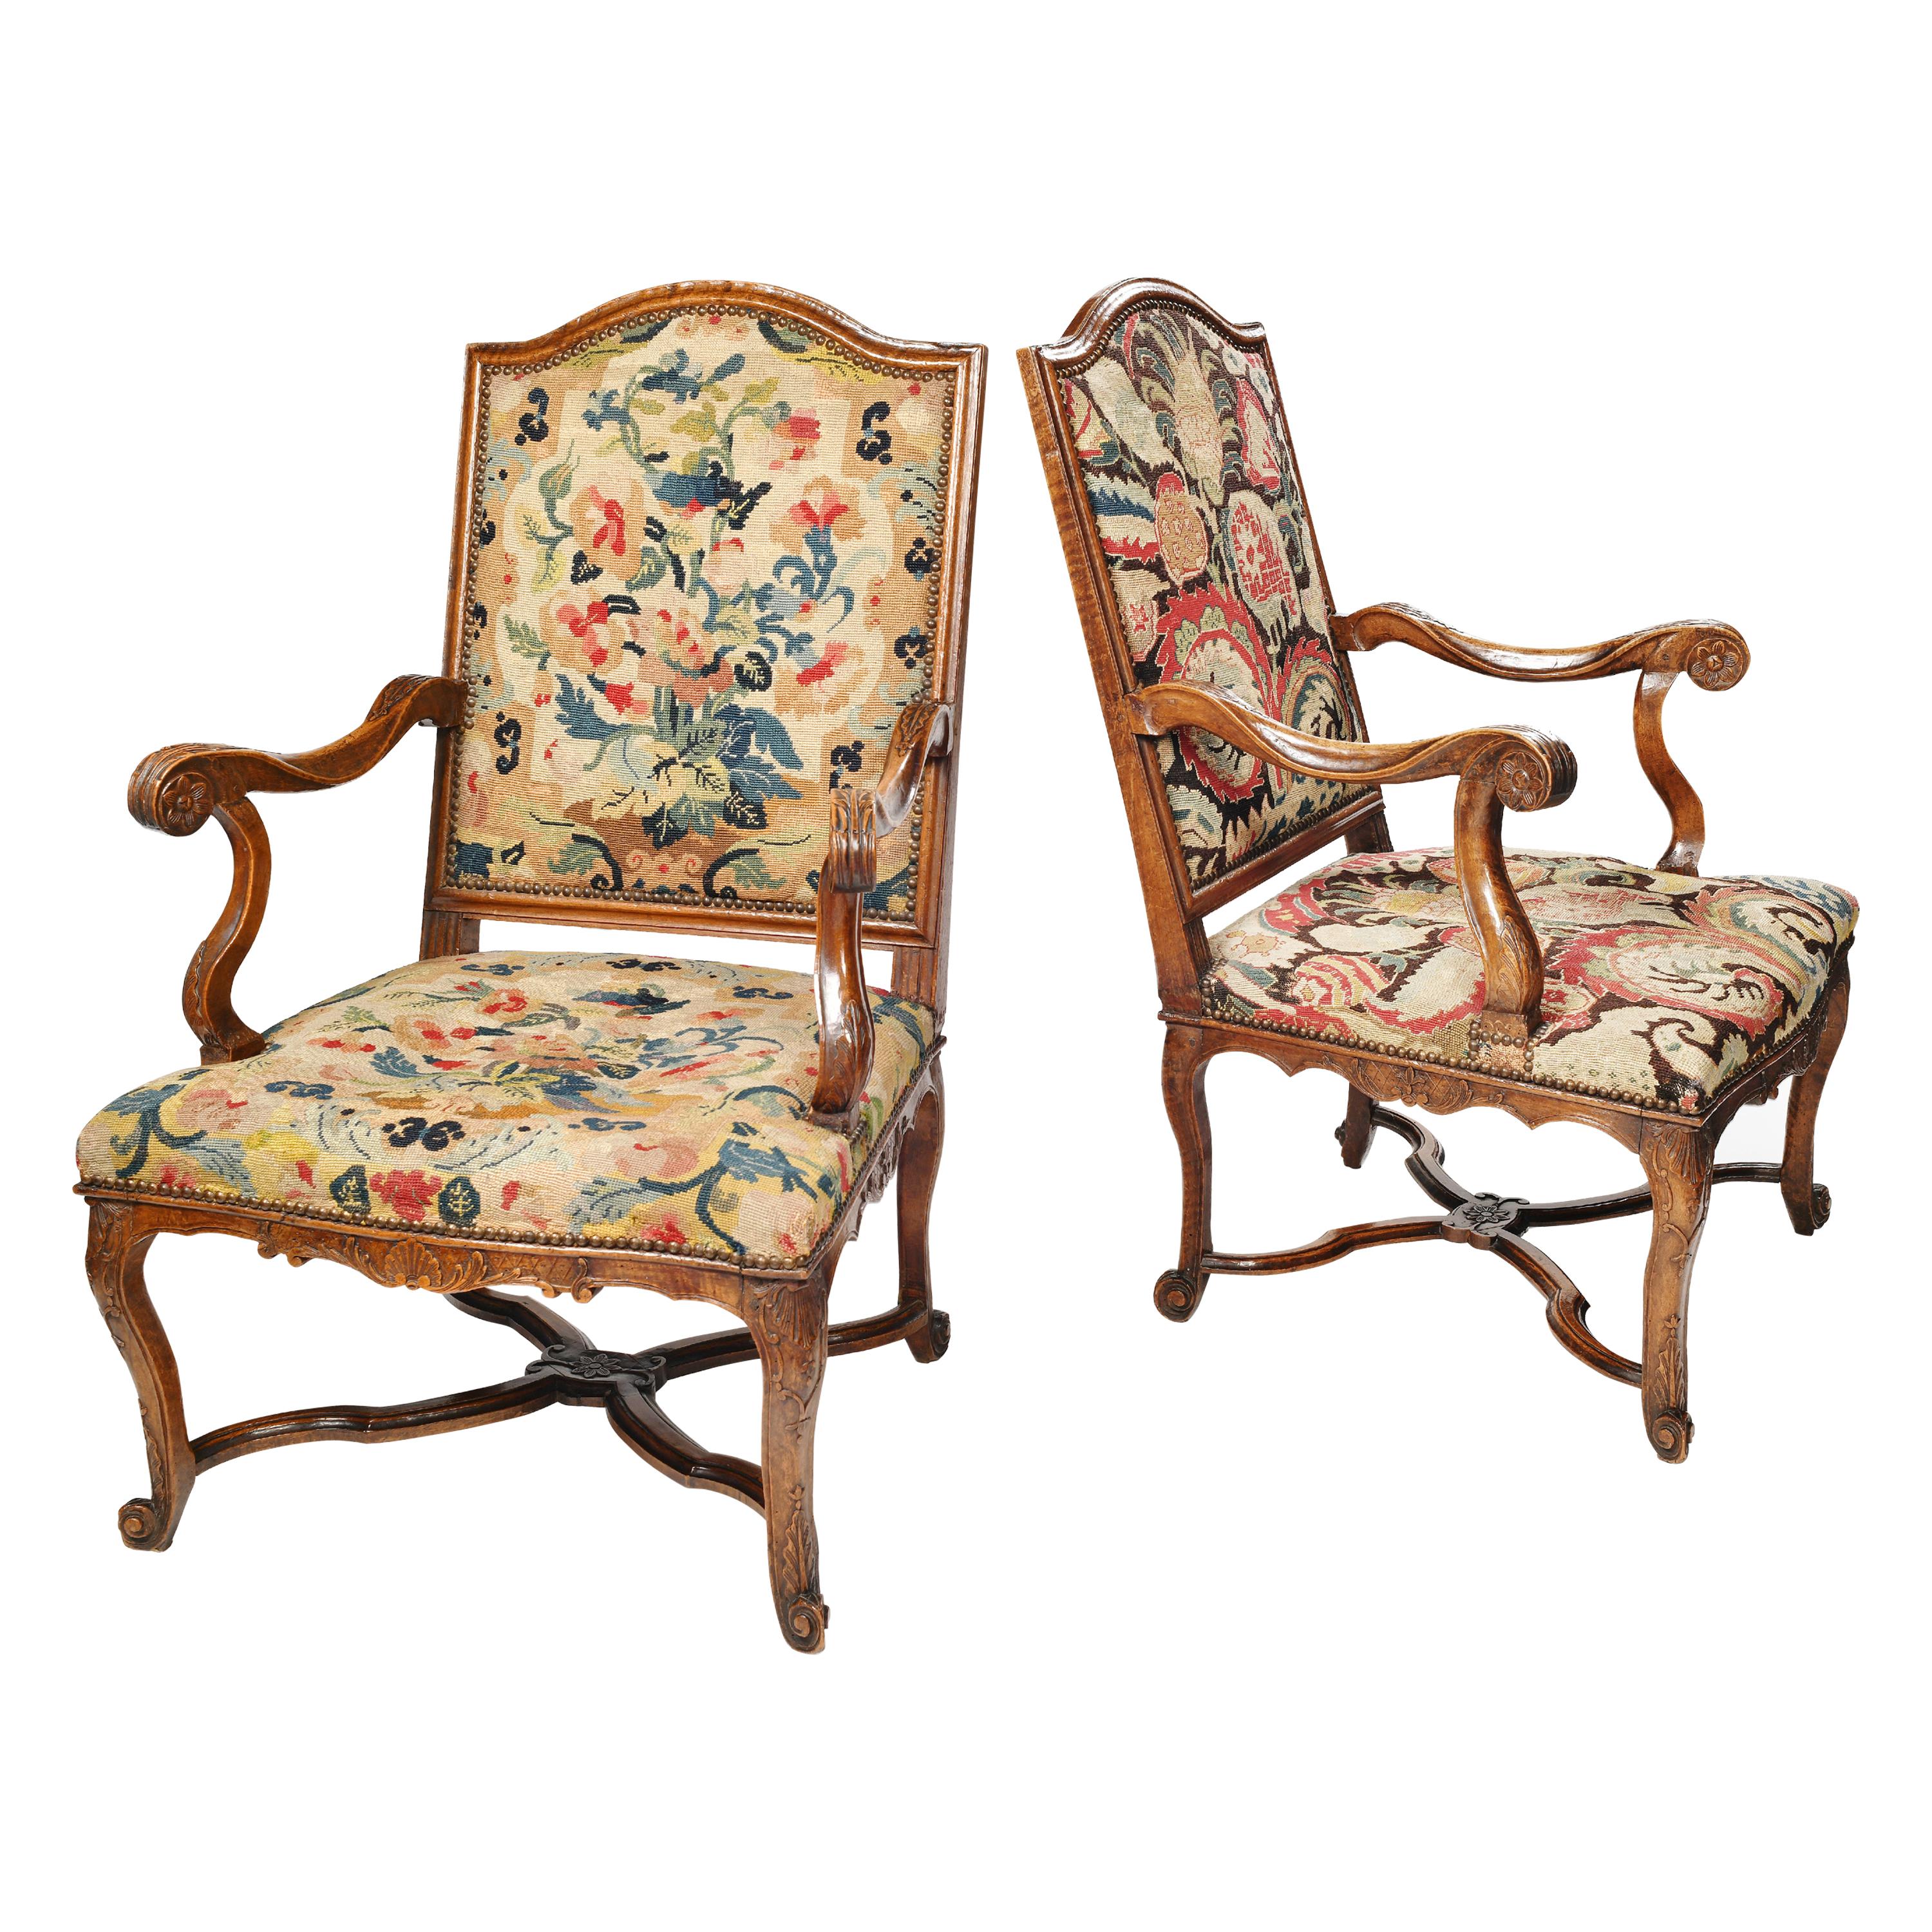 Pair of French Régence Armchairs with Petit Point Embroidery, France, circa 1725